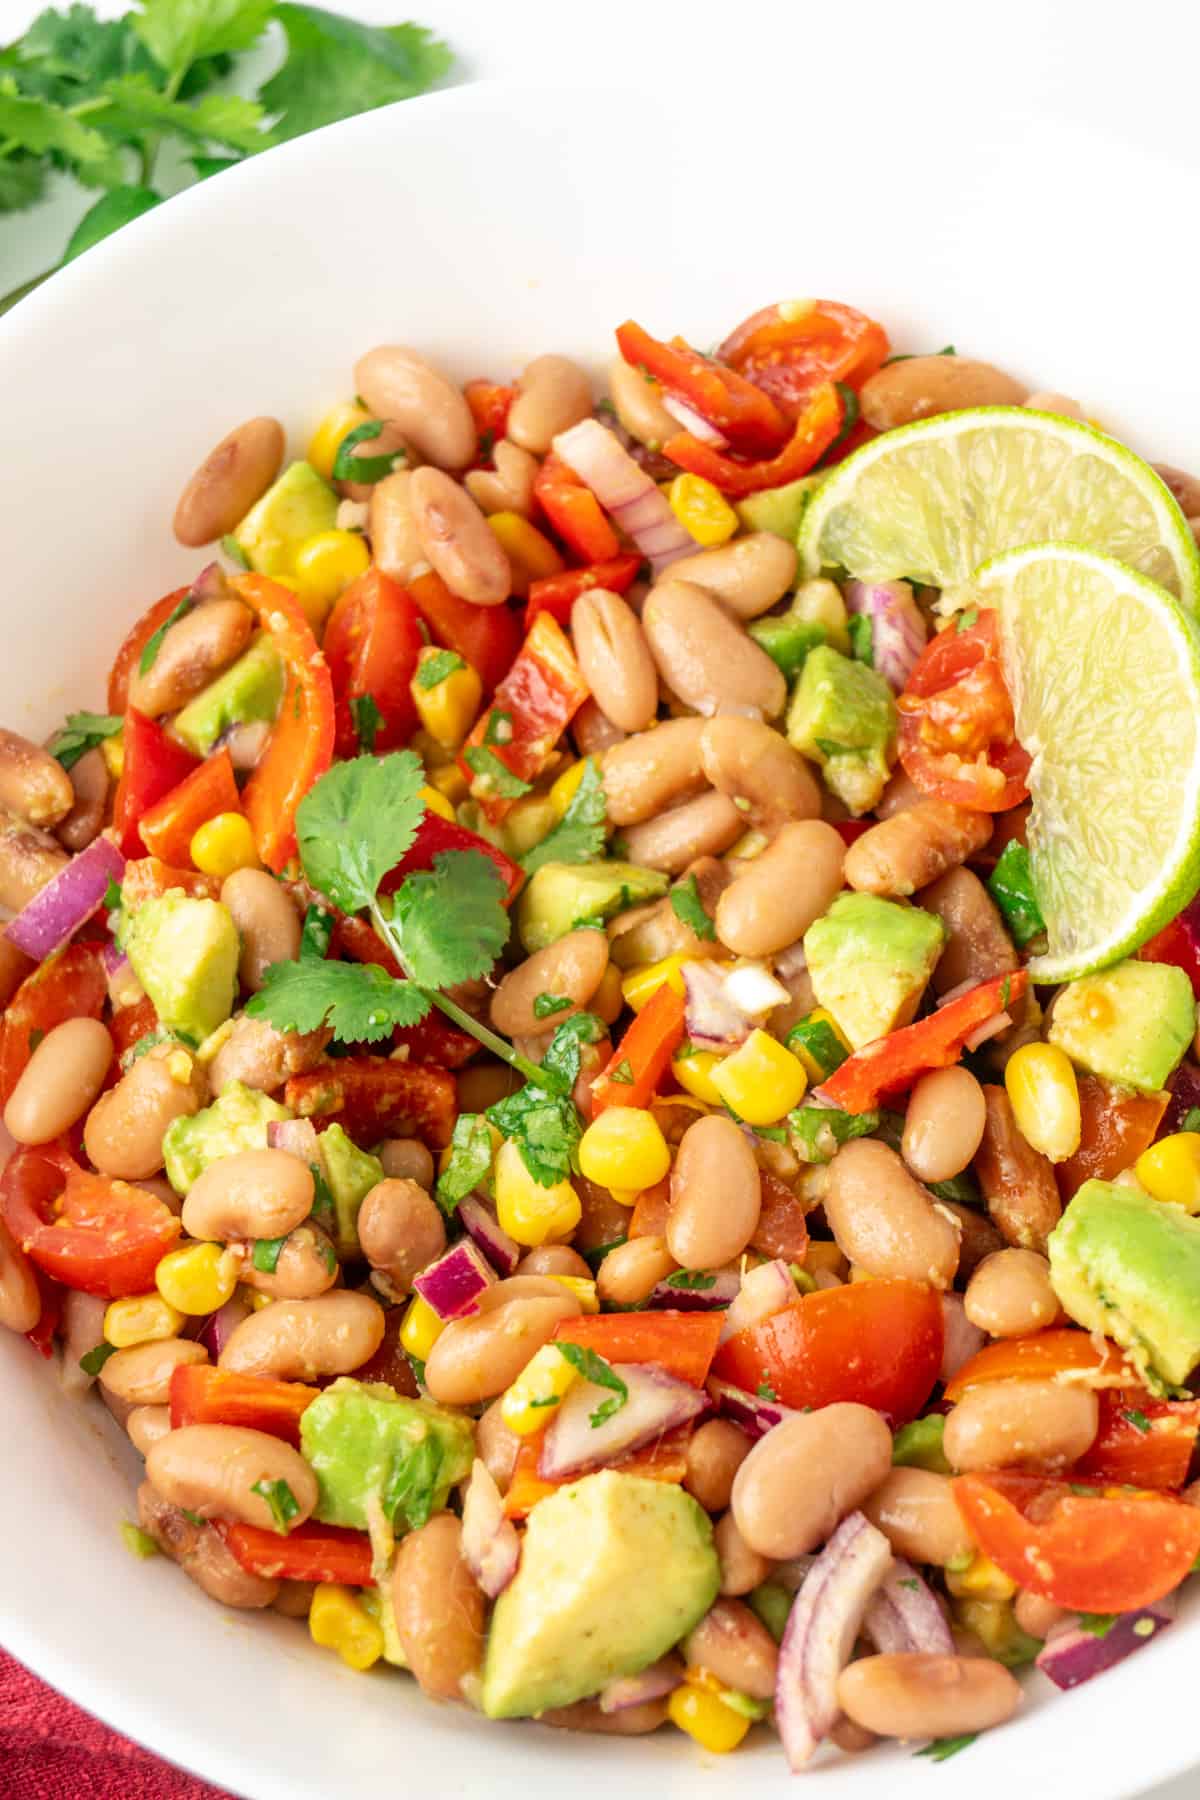 A colourful salad of beans and raw vegetables, garnished with lime wedges.